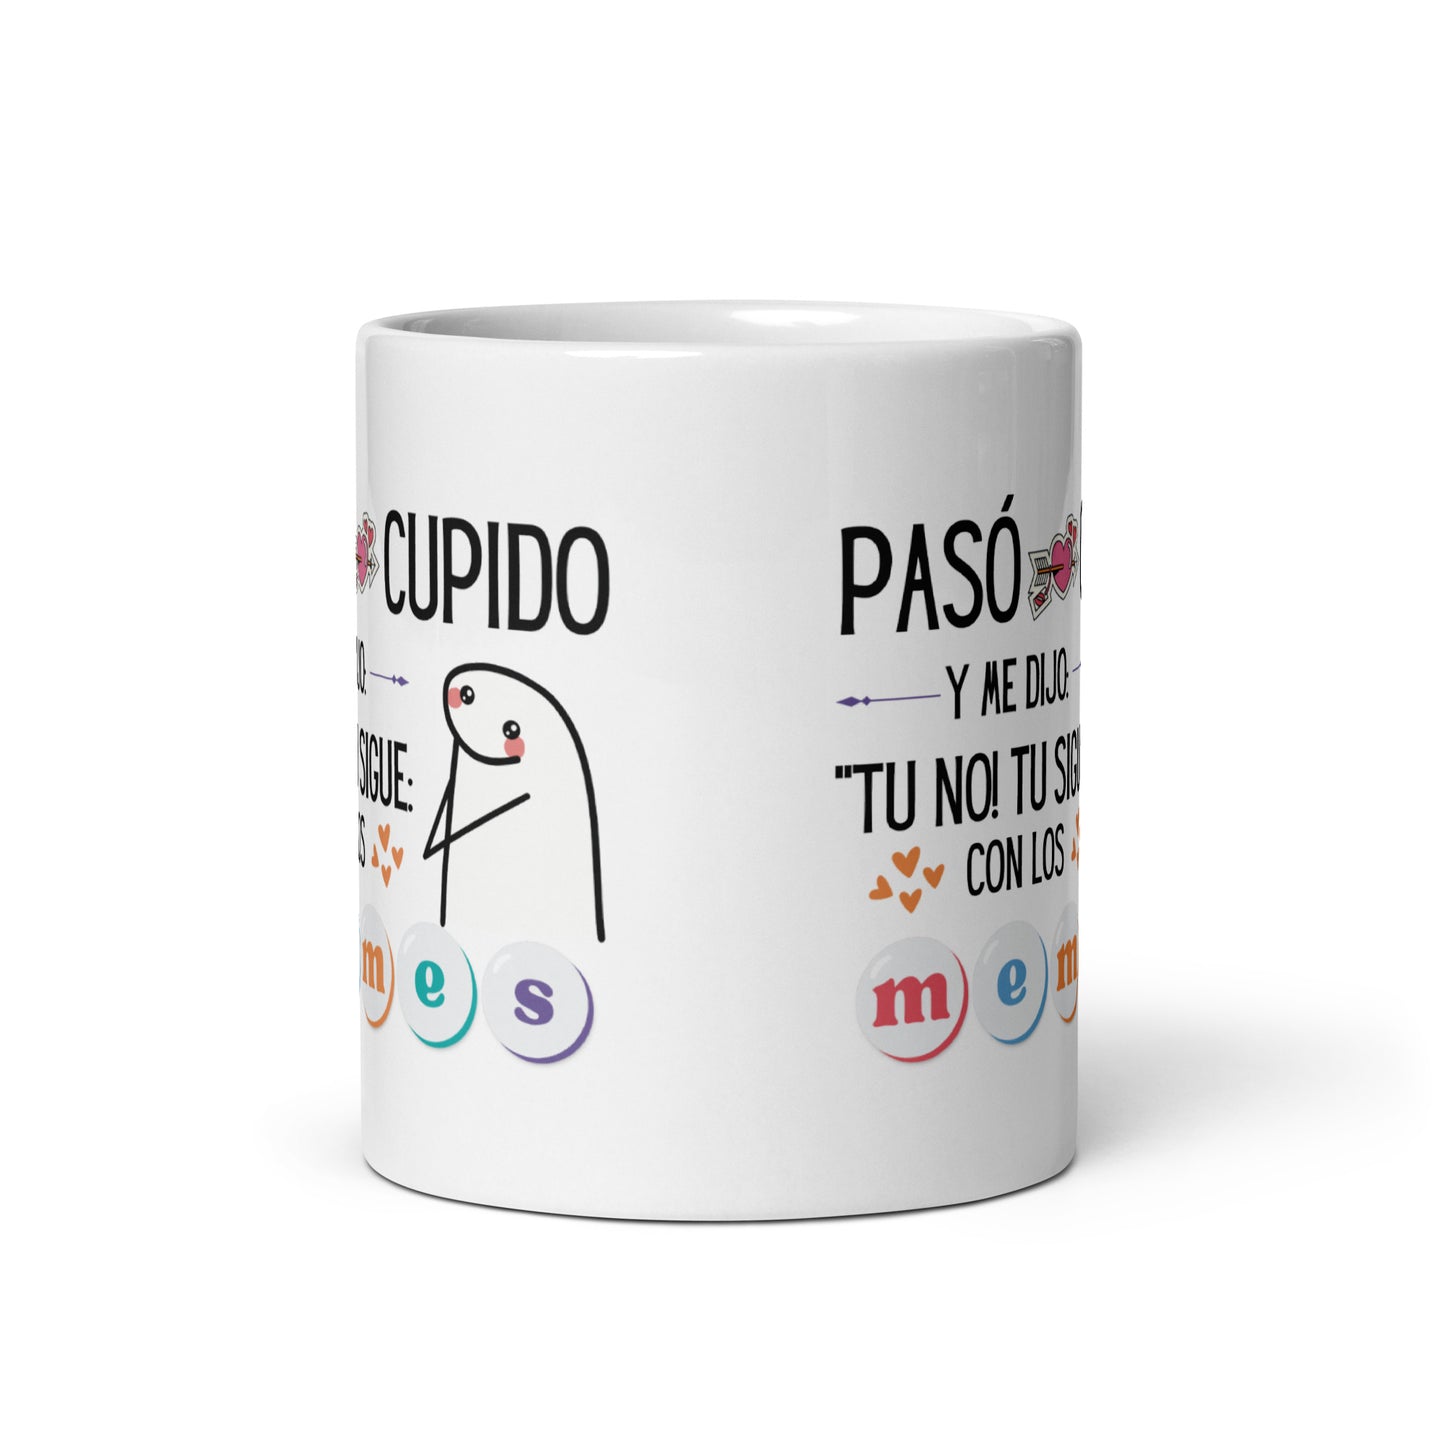 Flork Cupid passed and said to me: Not you! You Keep With The Memes mug